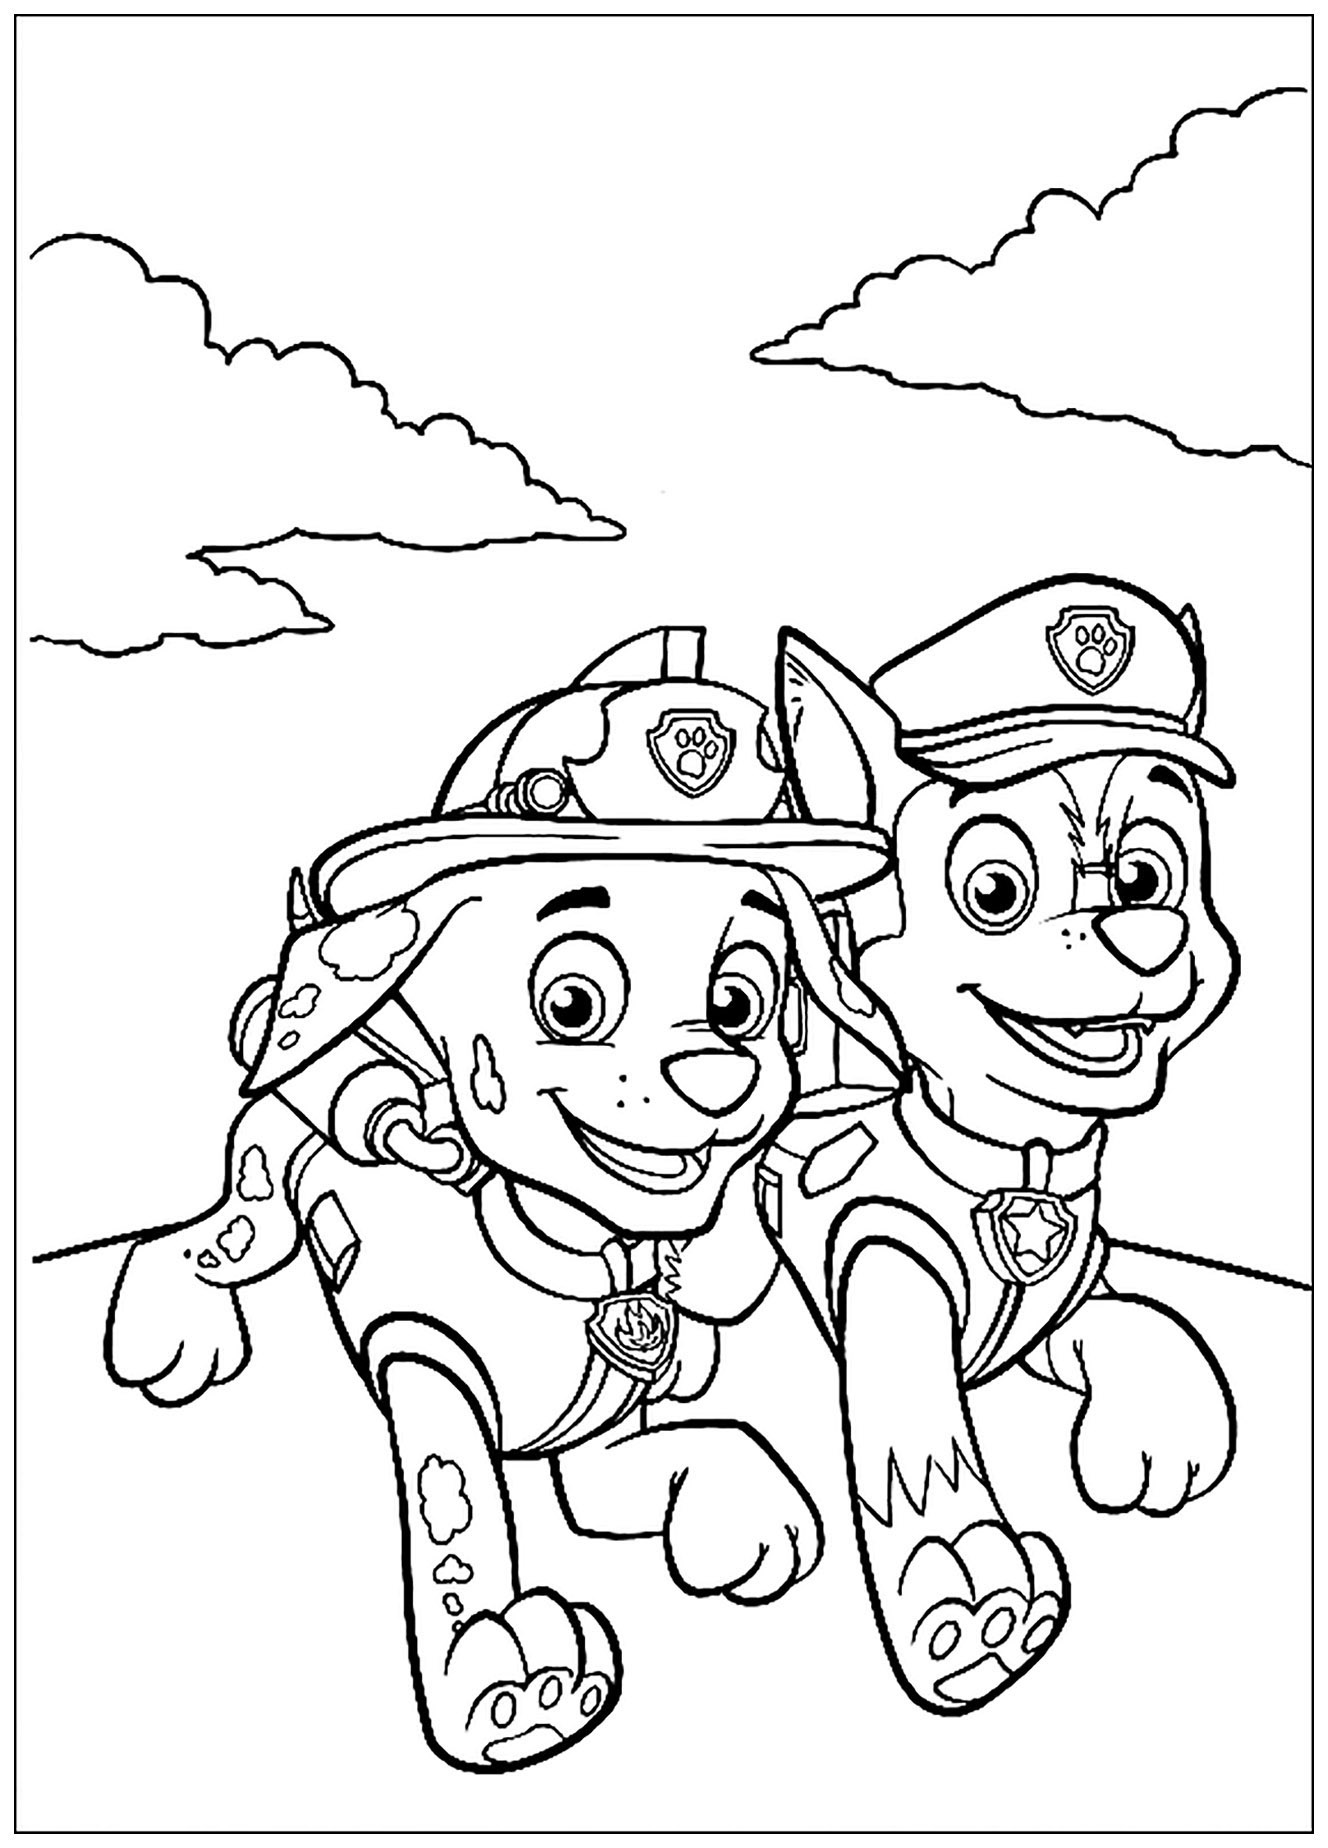 Beautiful Patrol coloring pages: Chase and Rocky